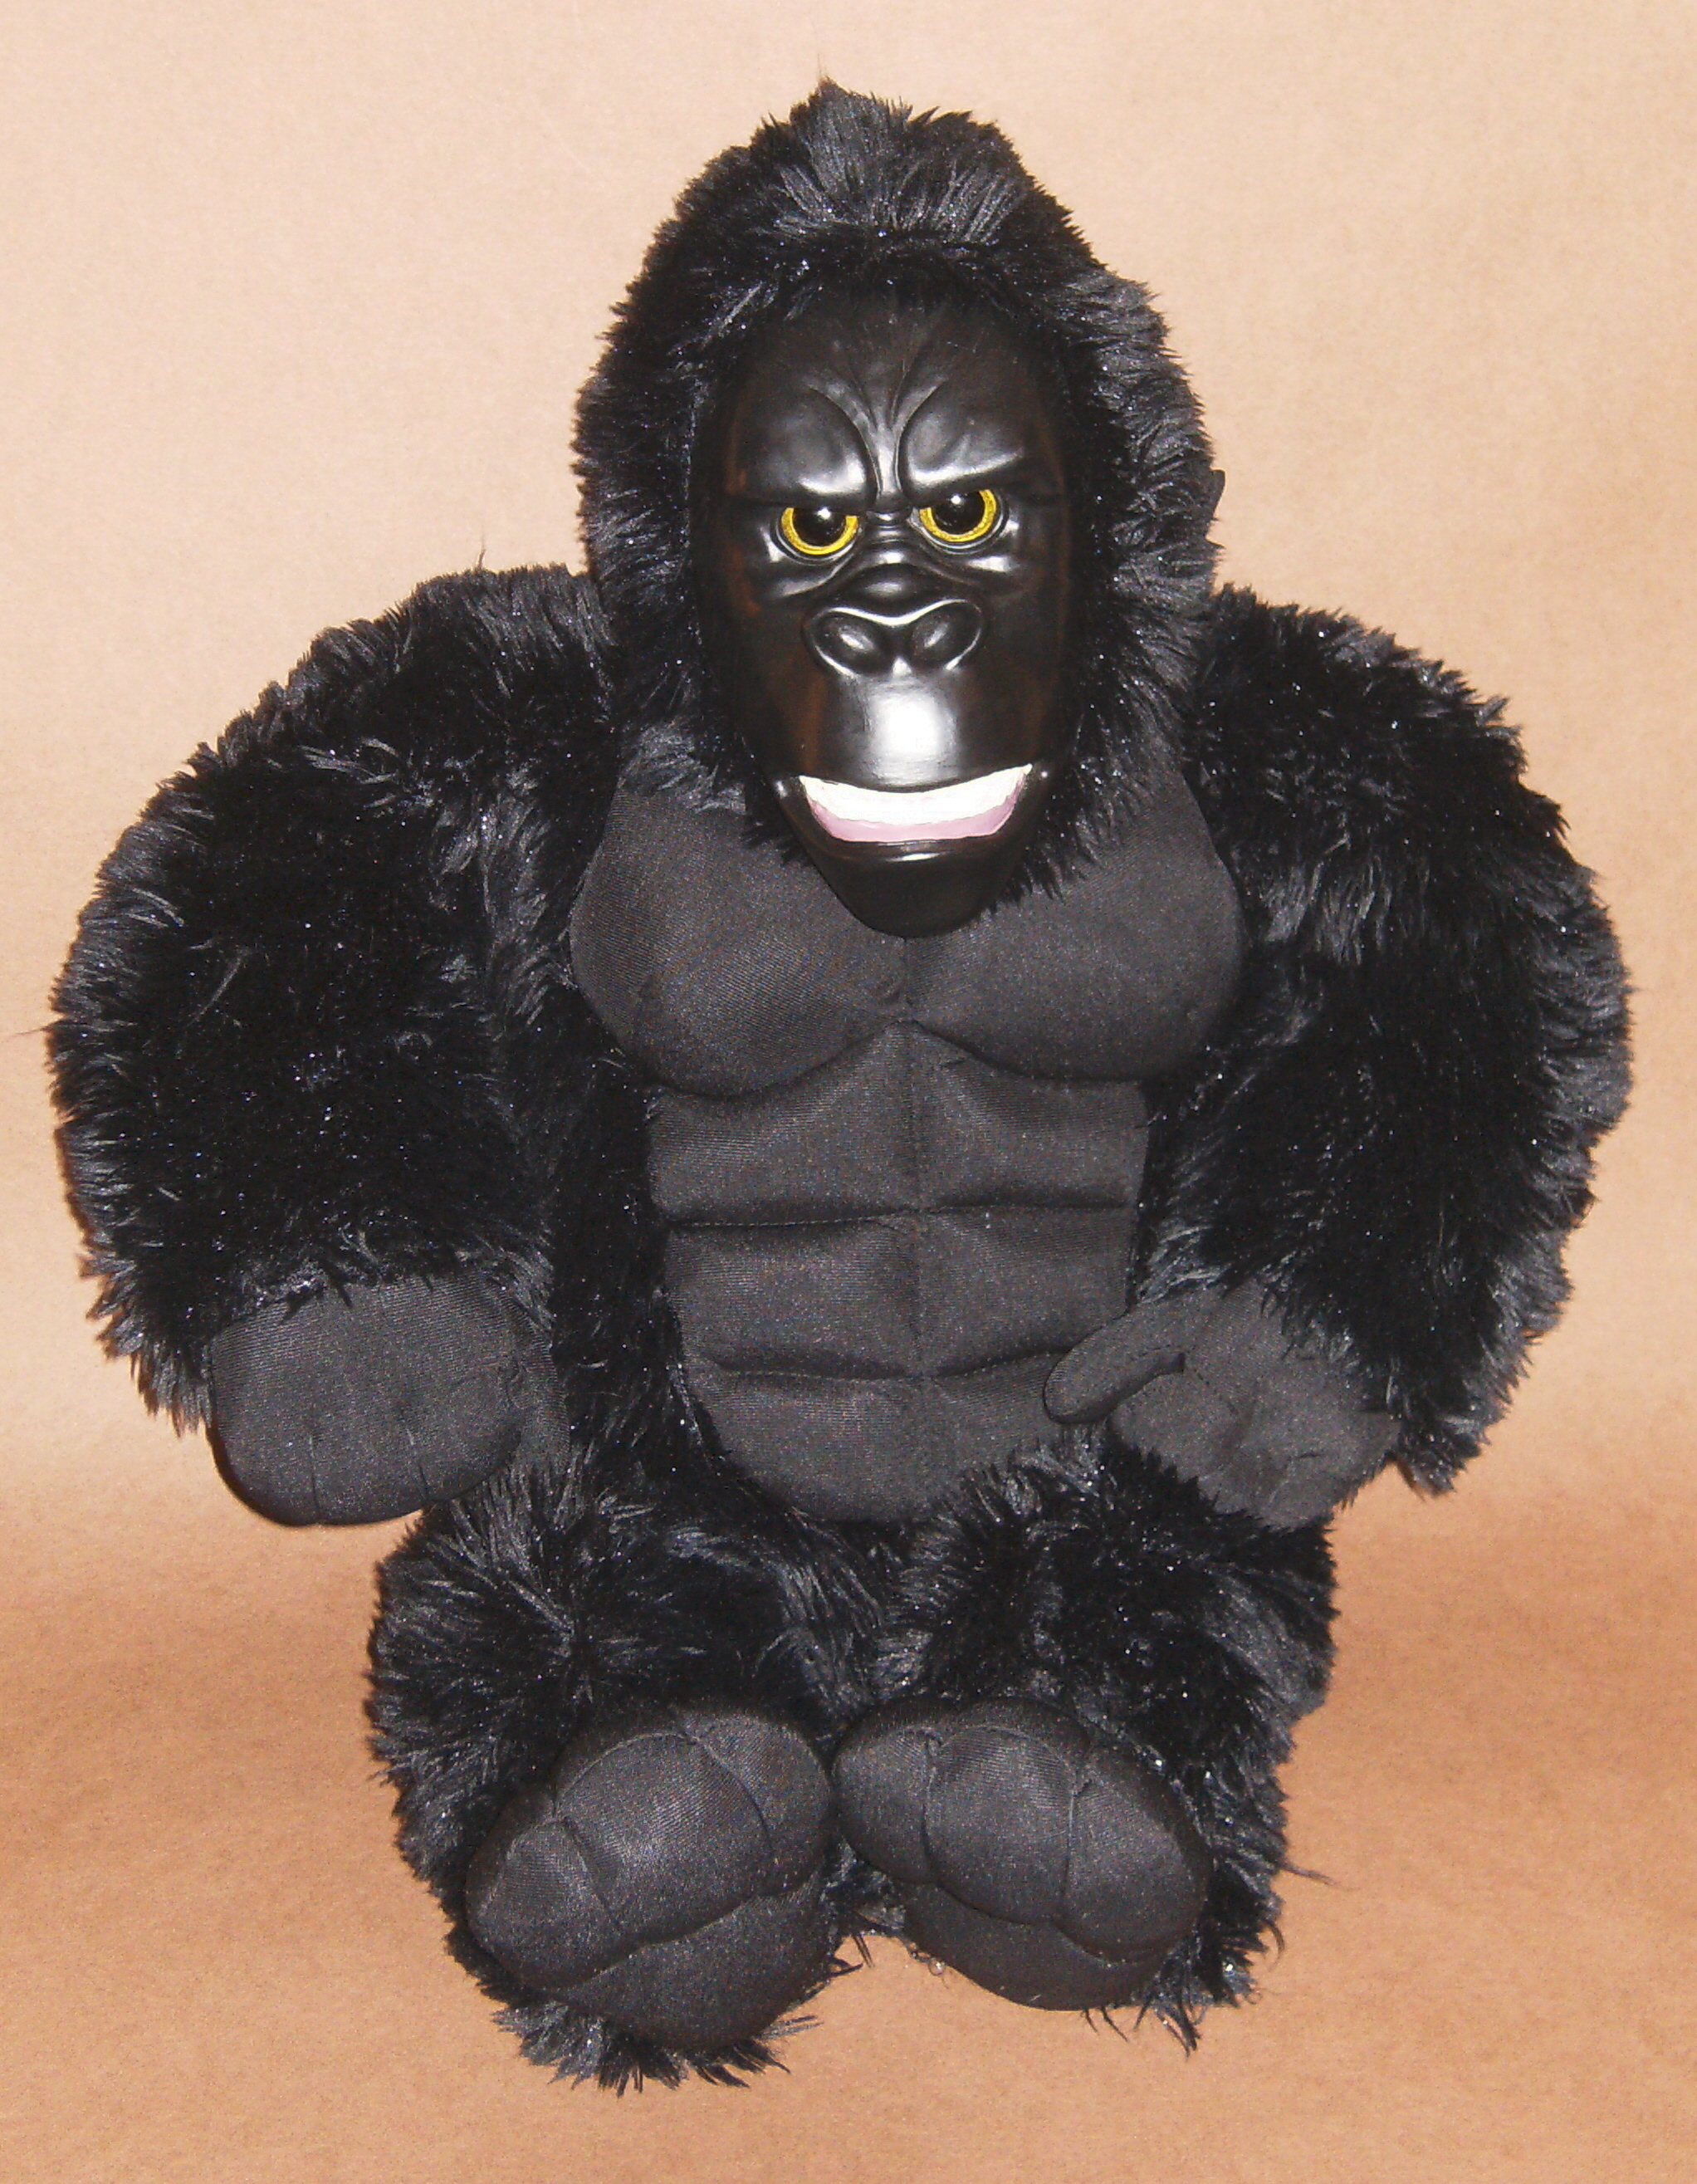 This-24-inch-tall-King-Kong-plush-doll-was-released-by-X-one-X-Archive-Inc.-Beverly-Hills-Teddy-Bear-Co.-in-2…  | Fotos de king kong, King kong, Juguetes de godzilla